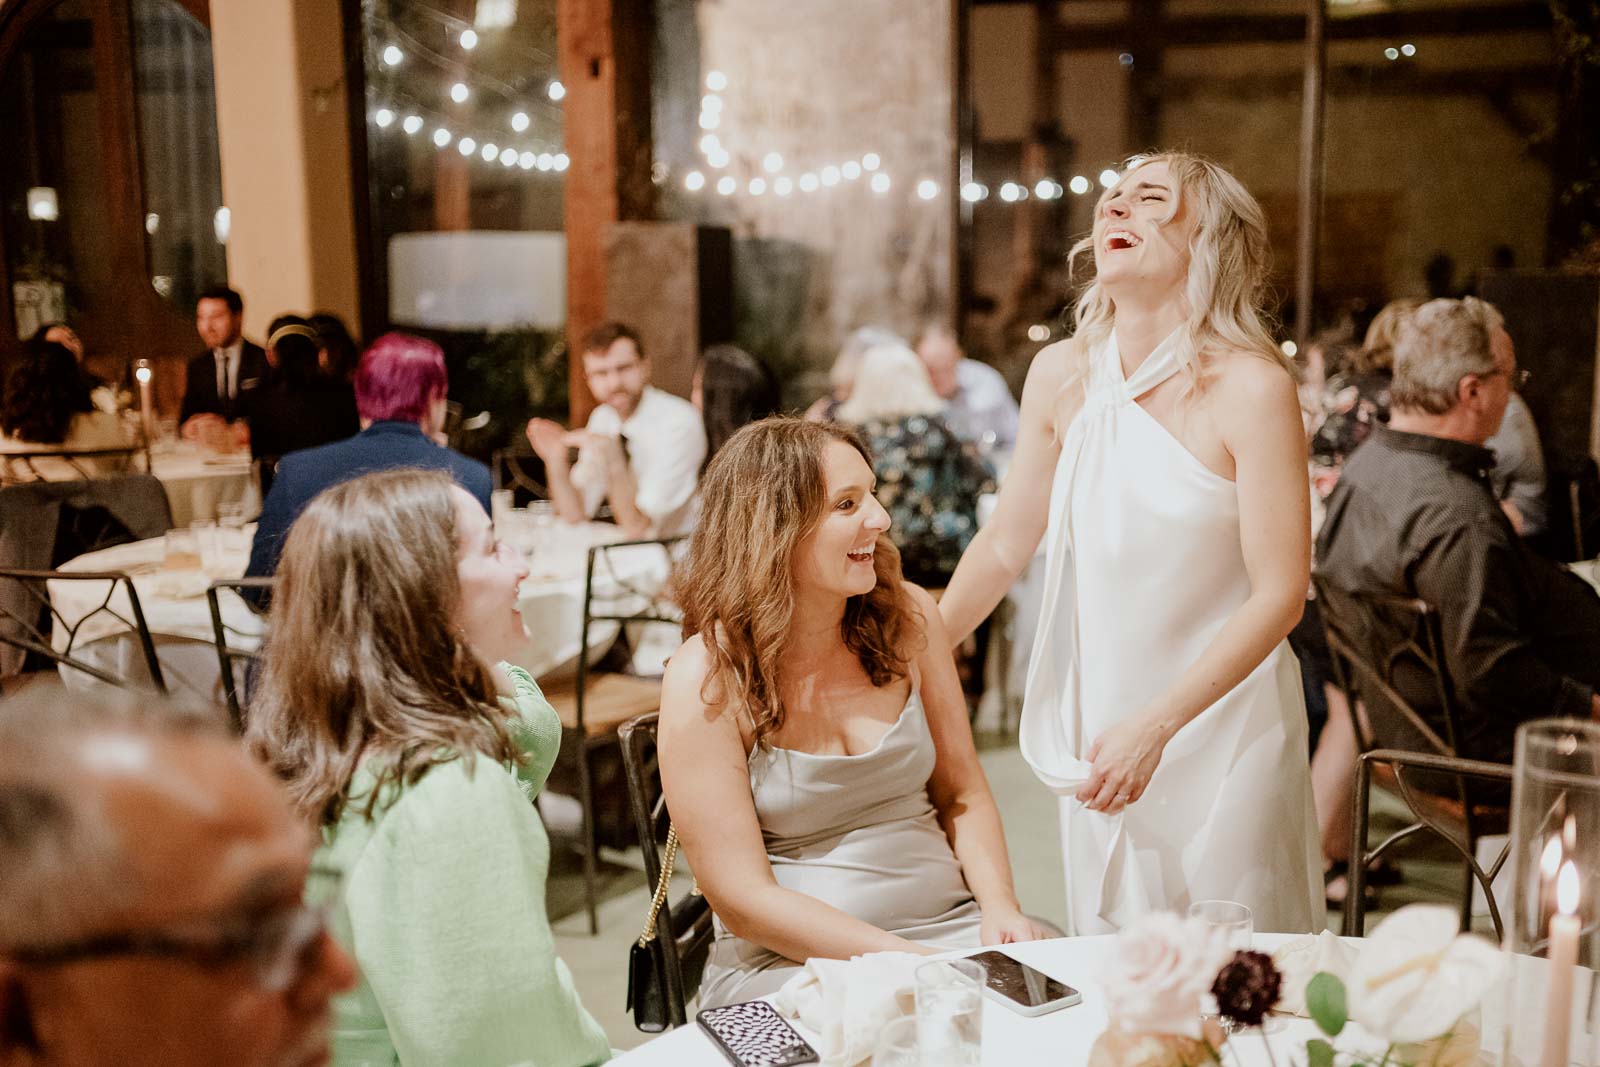 The bride shared a light hearted moment with one of guests around a table